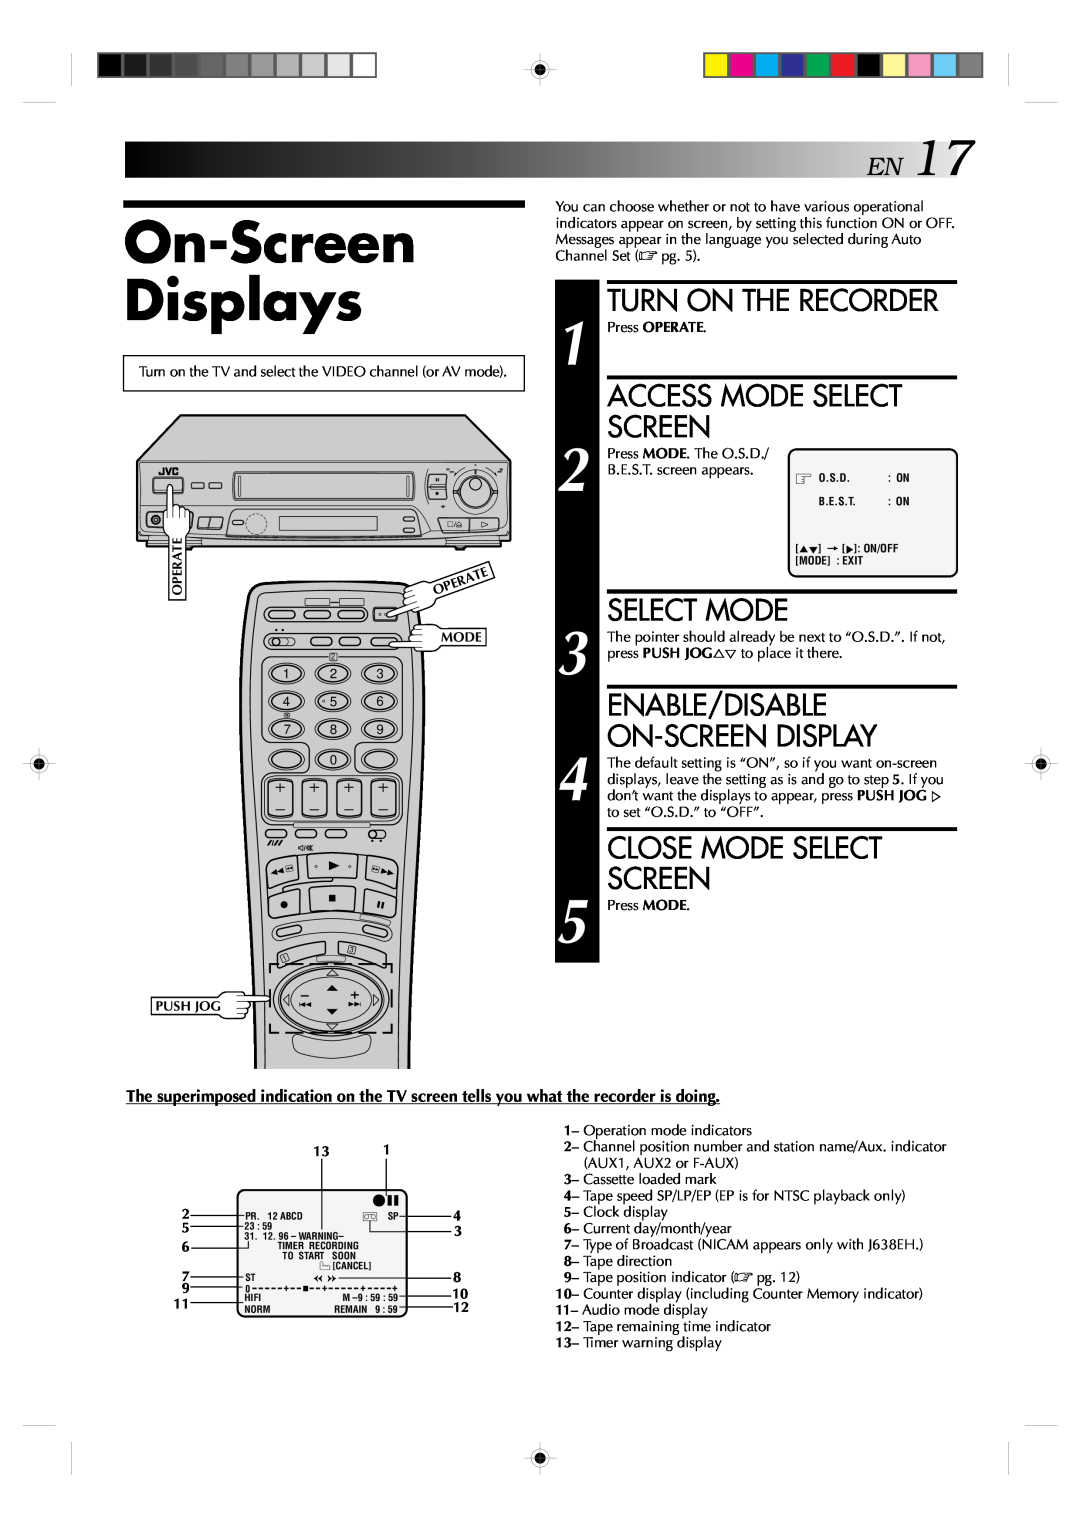 JVC HR-J638E/EH specifications On-Screen Displays, EN17, Turn On The Recorder, Select Mode, Close Mode Select 